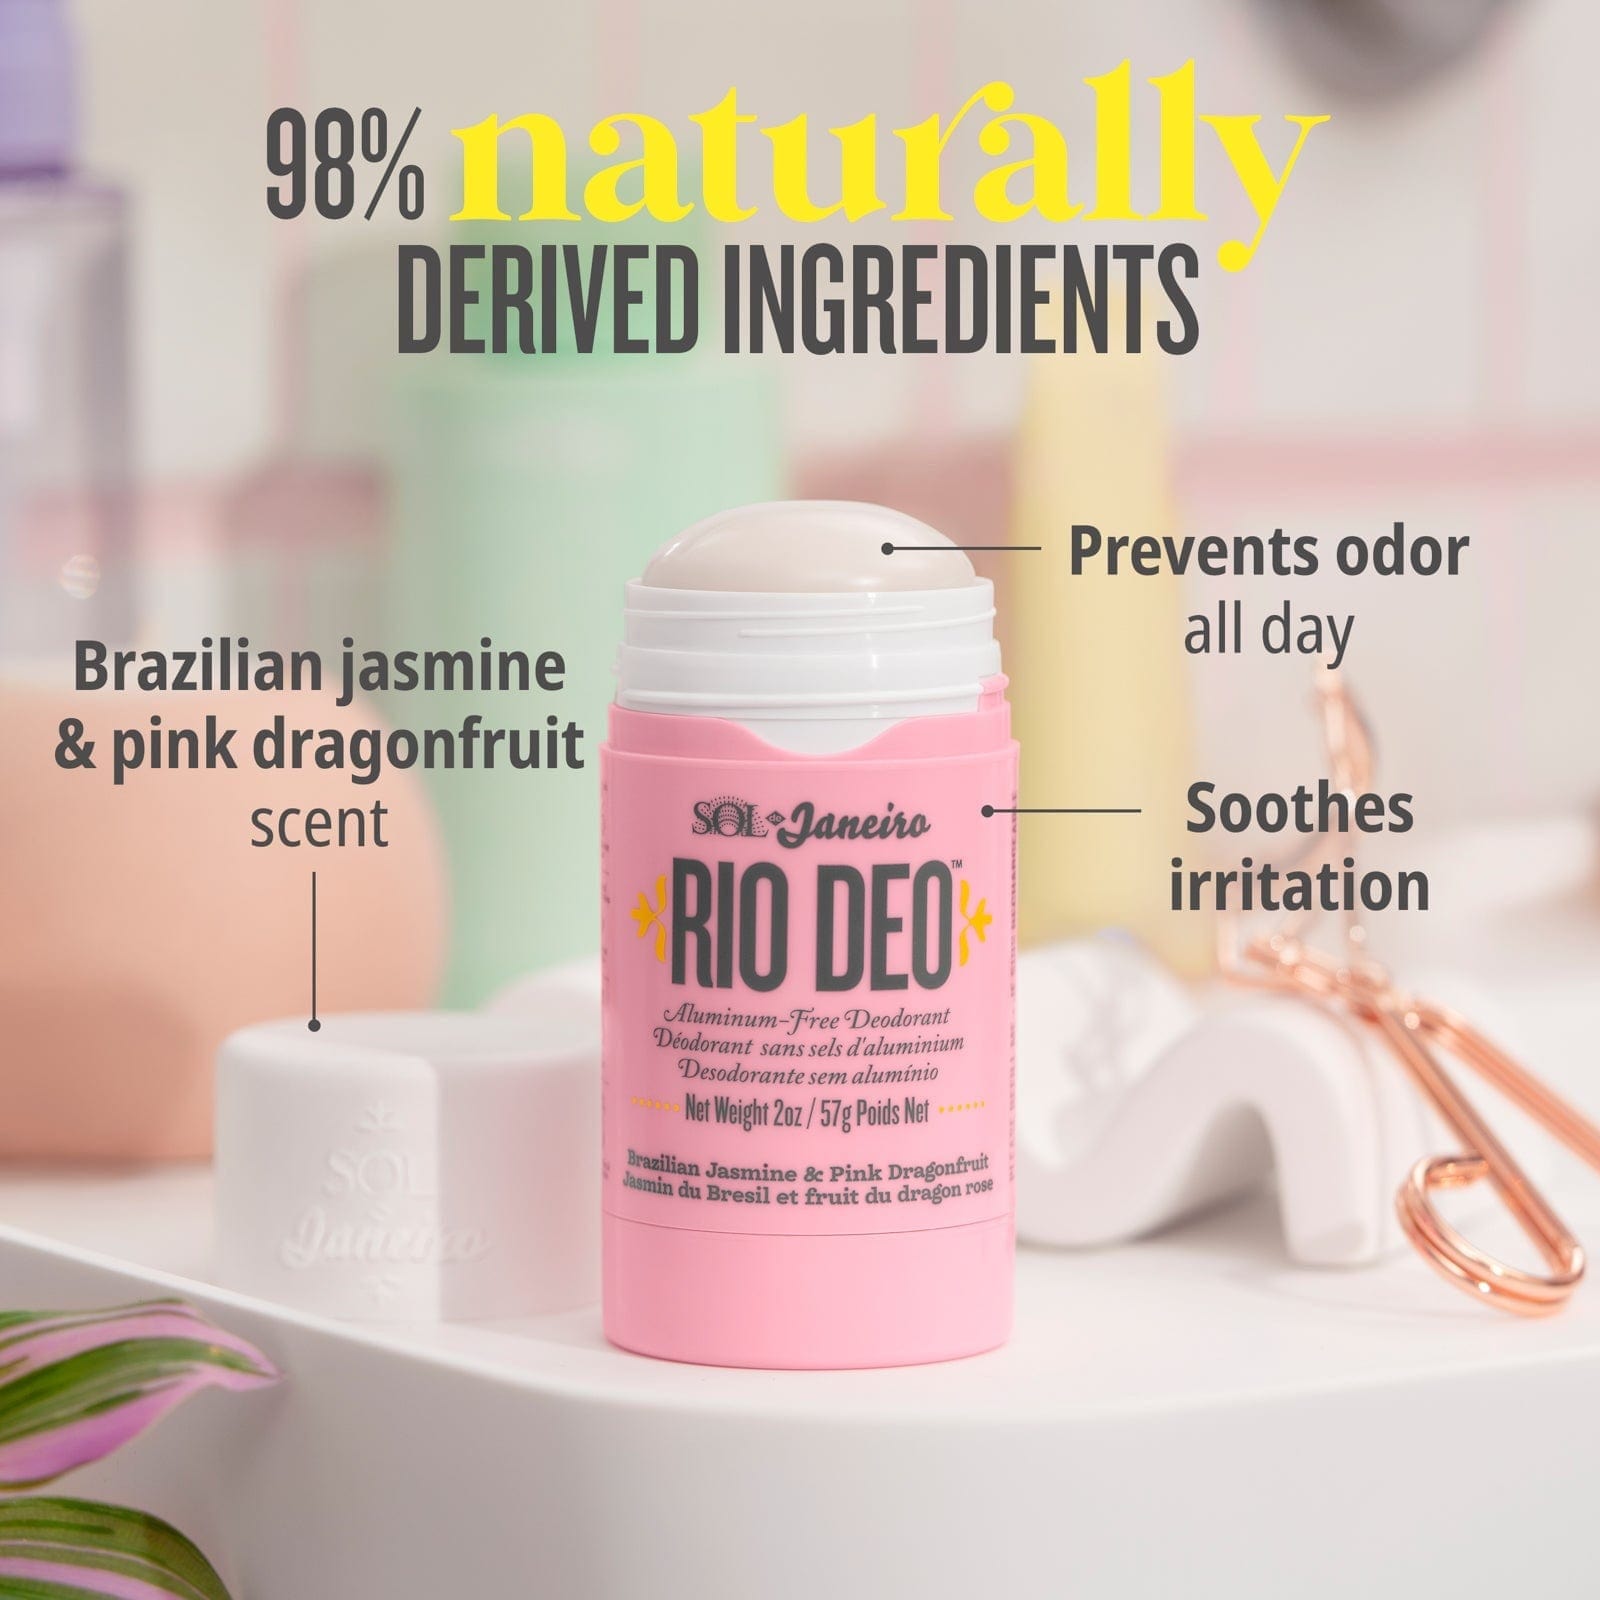 98% naturally derived ingredients. Brazilian jasmine &amp; pink dragonfruit scent, prevents odor all day and soothes irritation